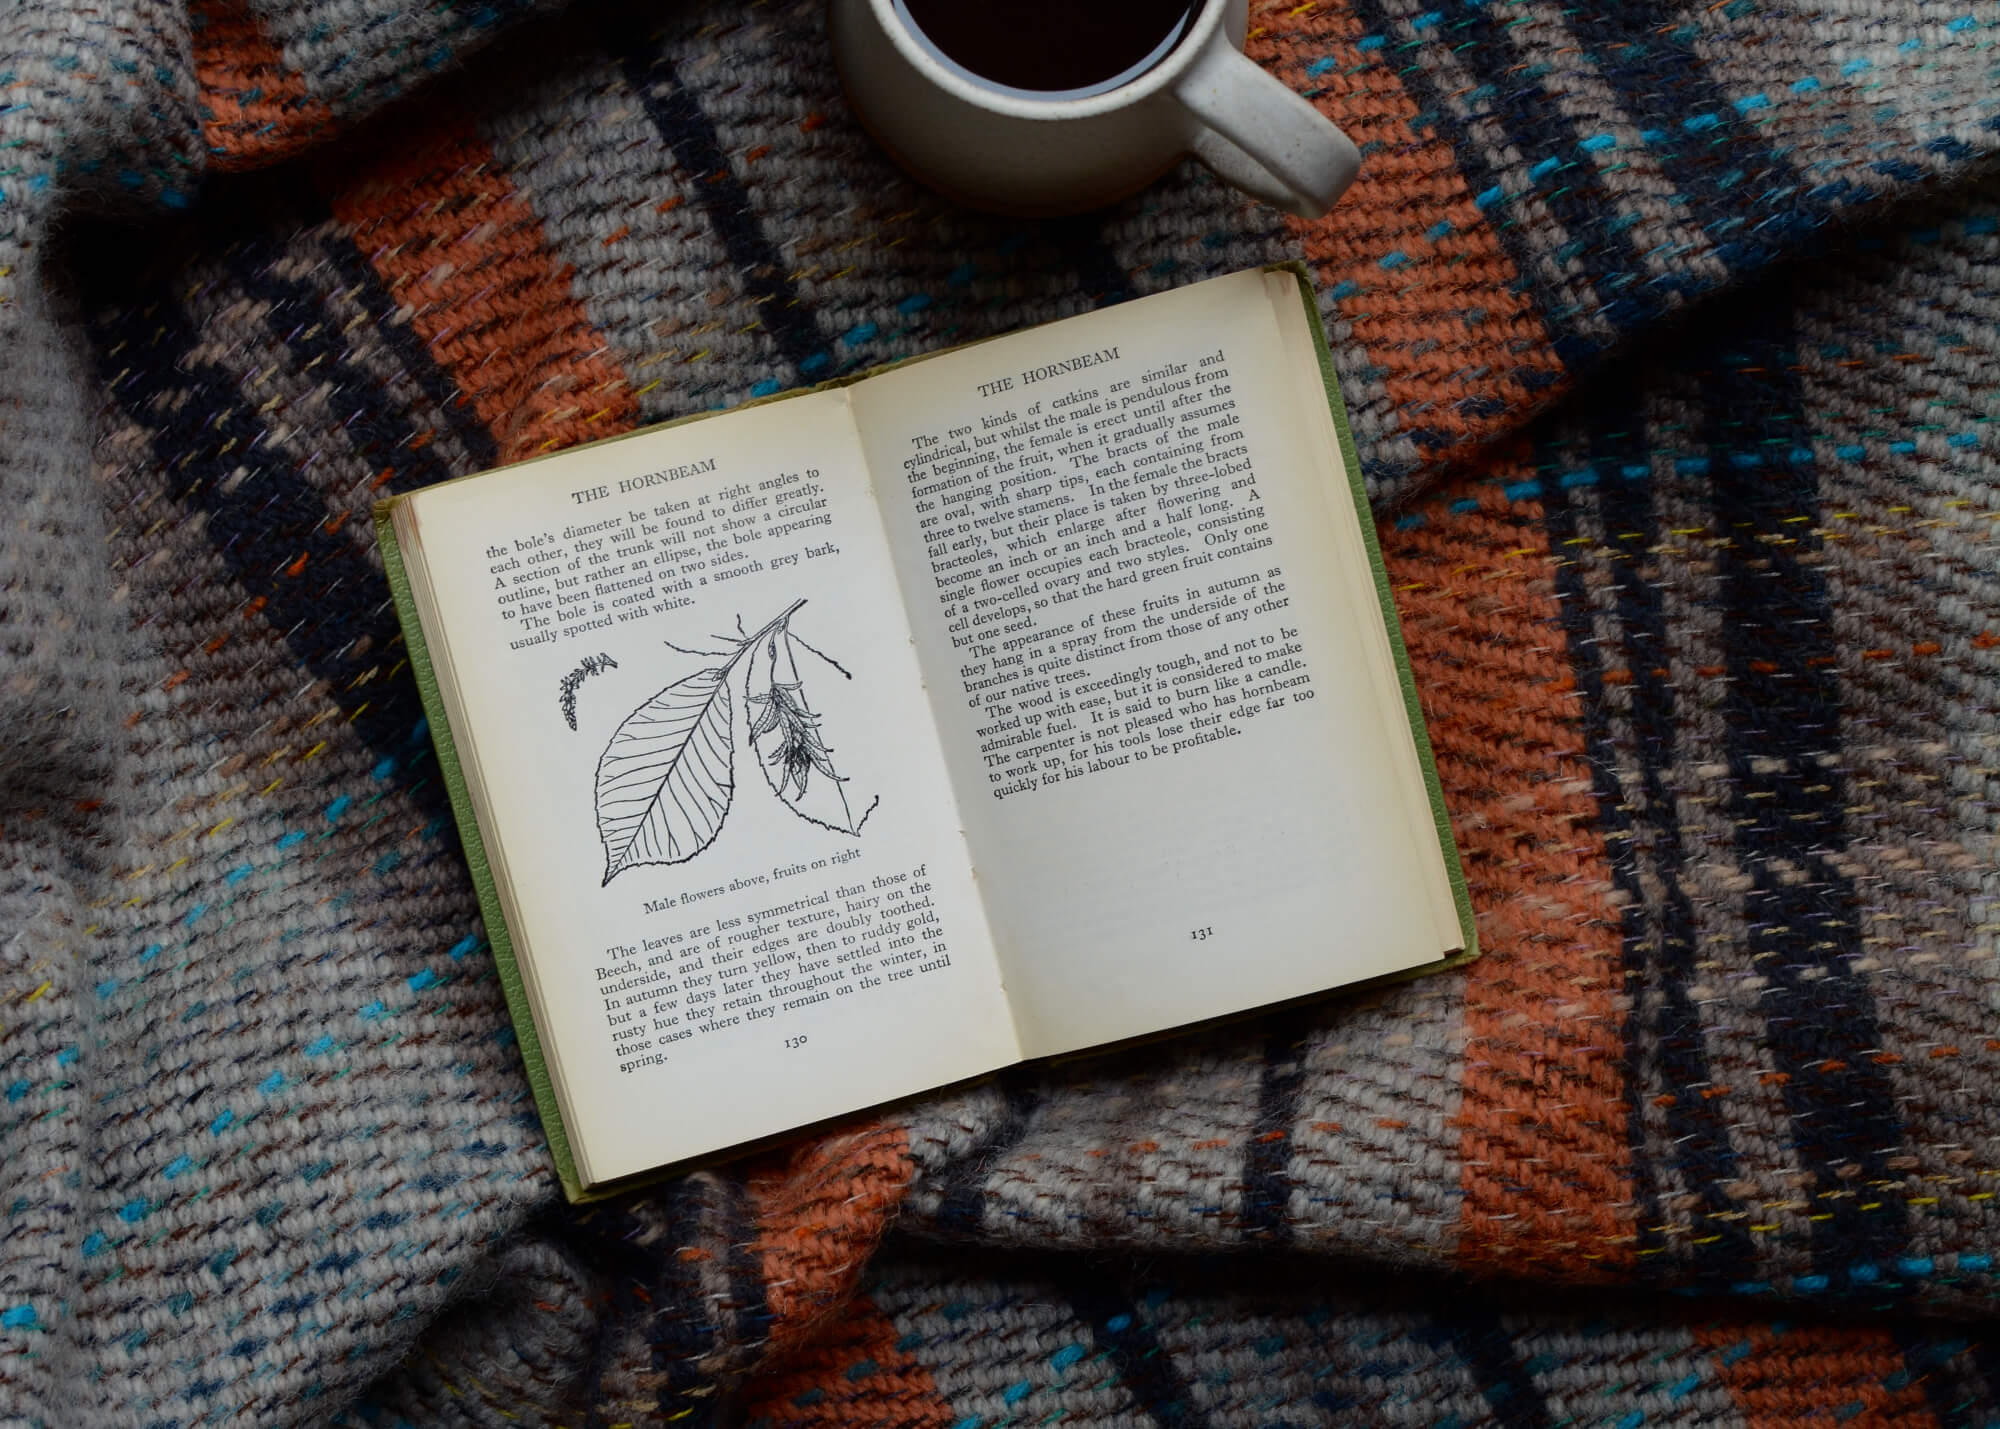 recycled wool throw in a check pattern, with an open book and ceramic coffee cup to the side